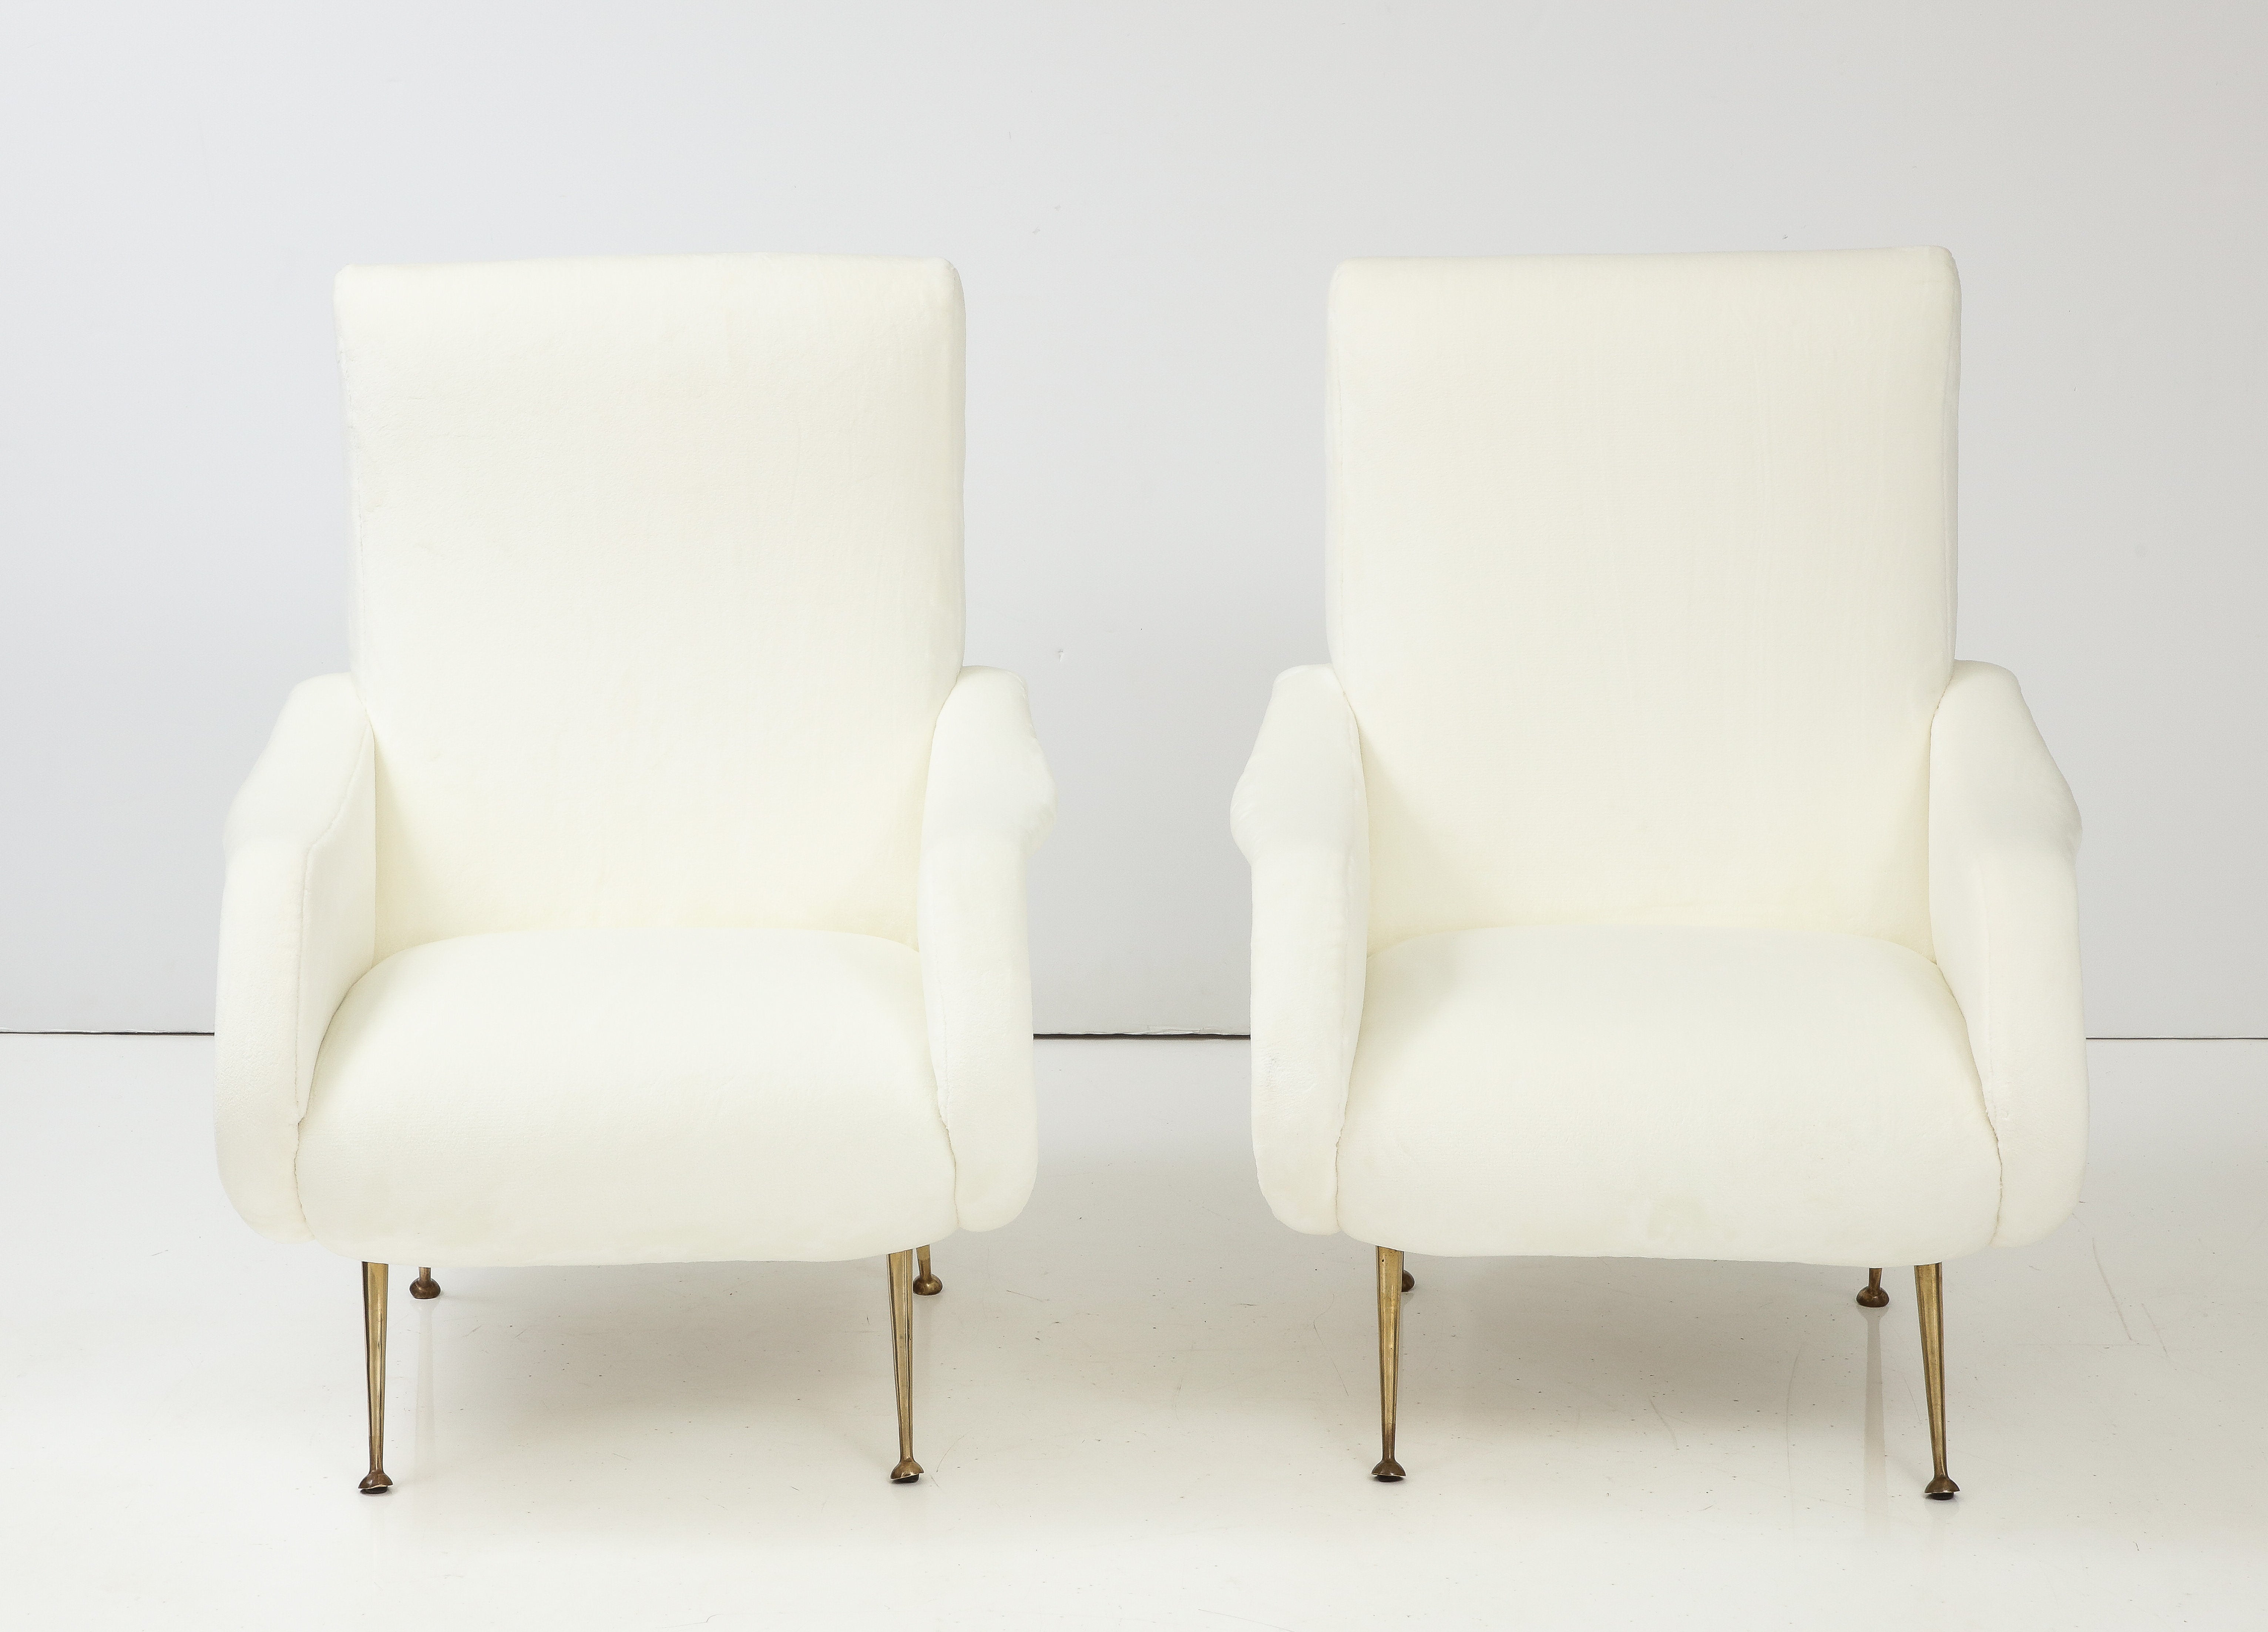 A pair of Italian mid-century modern lounge chairs, This pair have been fully restored and newly upholstered in our professional studio in a creamy white faux fur fabric with elegant tapered brass and metal legs.   The curvaceous and elegant lines